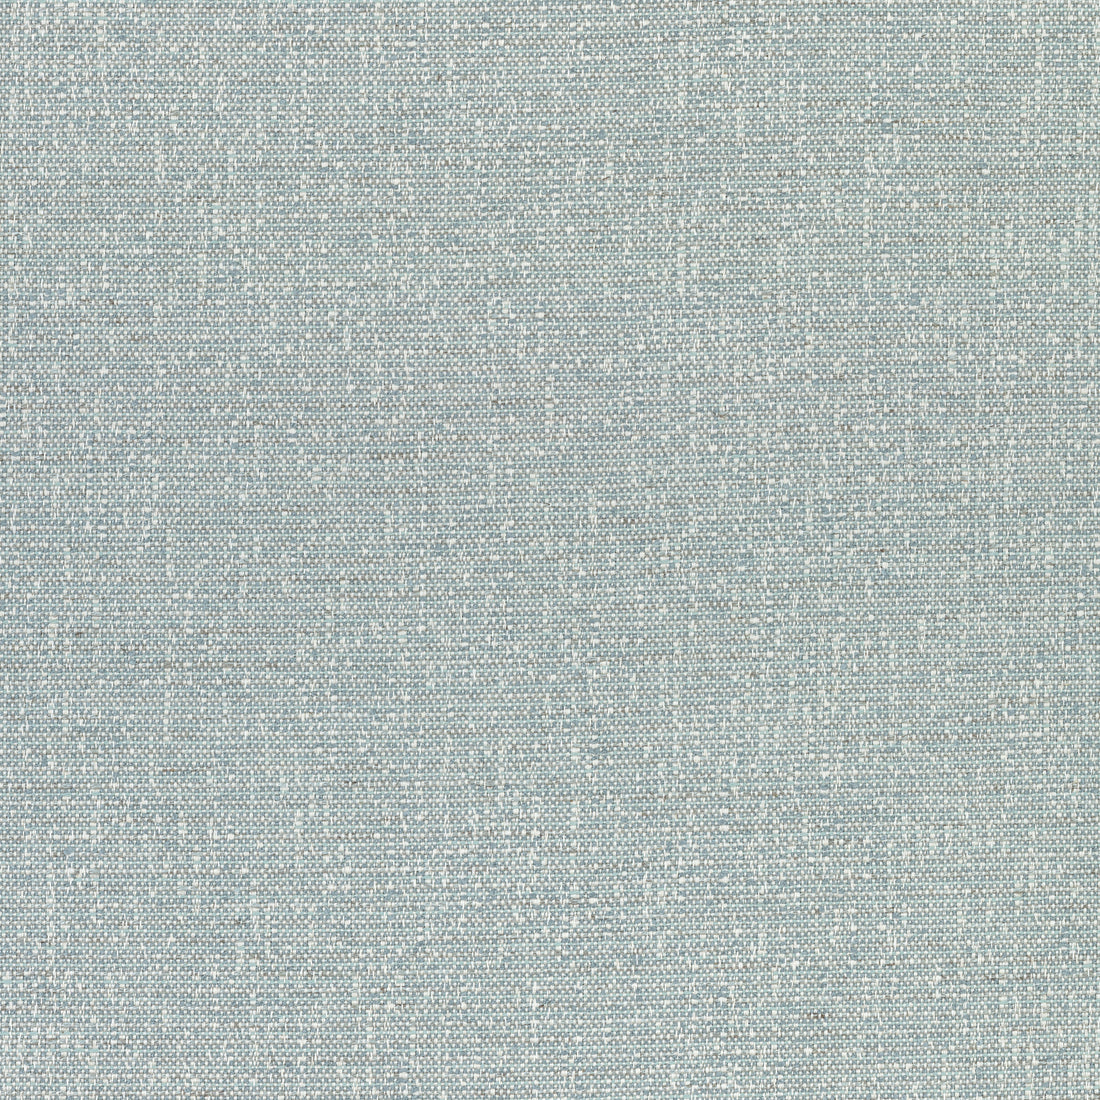 Everly fabric in spa blue color - pattern number W74061 - by Thibaut in the Cadence collection